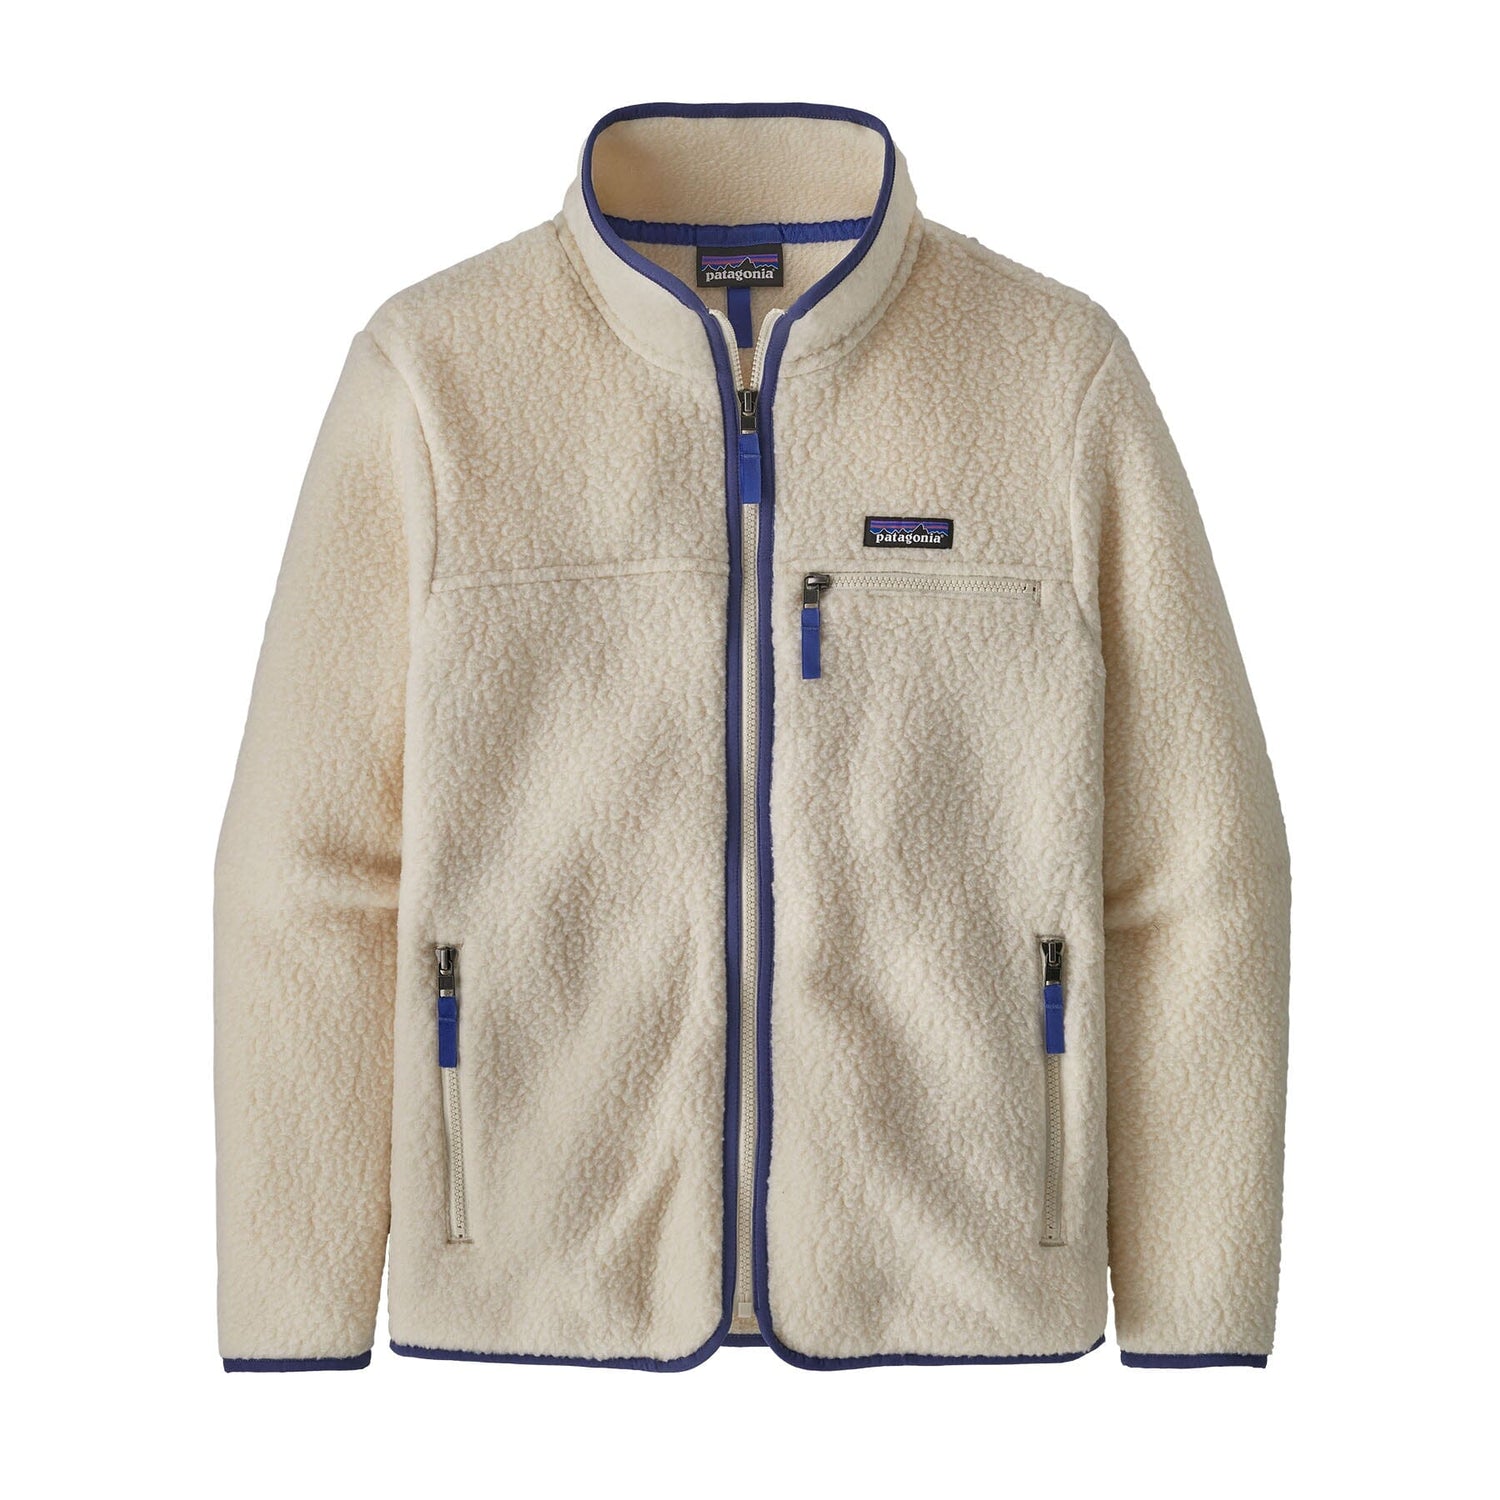 Patagonia W's Retro Pile Fleece Jacket - Recycled Polyester Natural Jacket